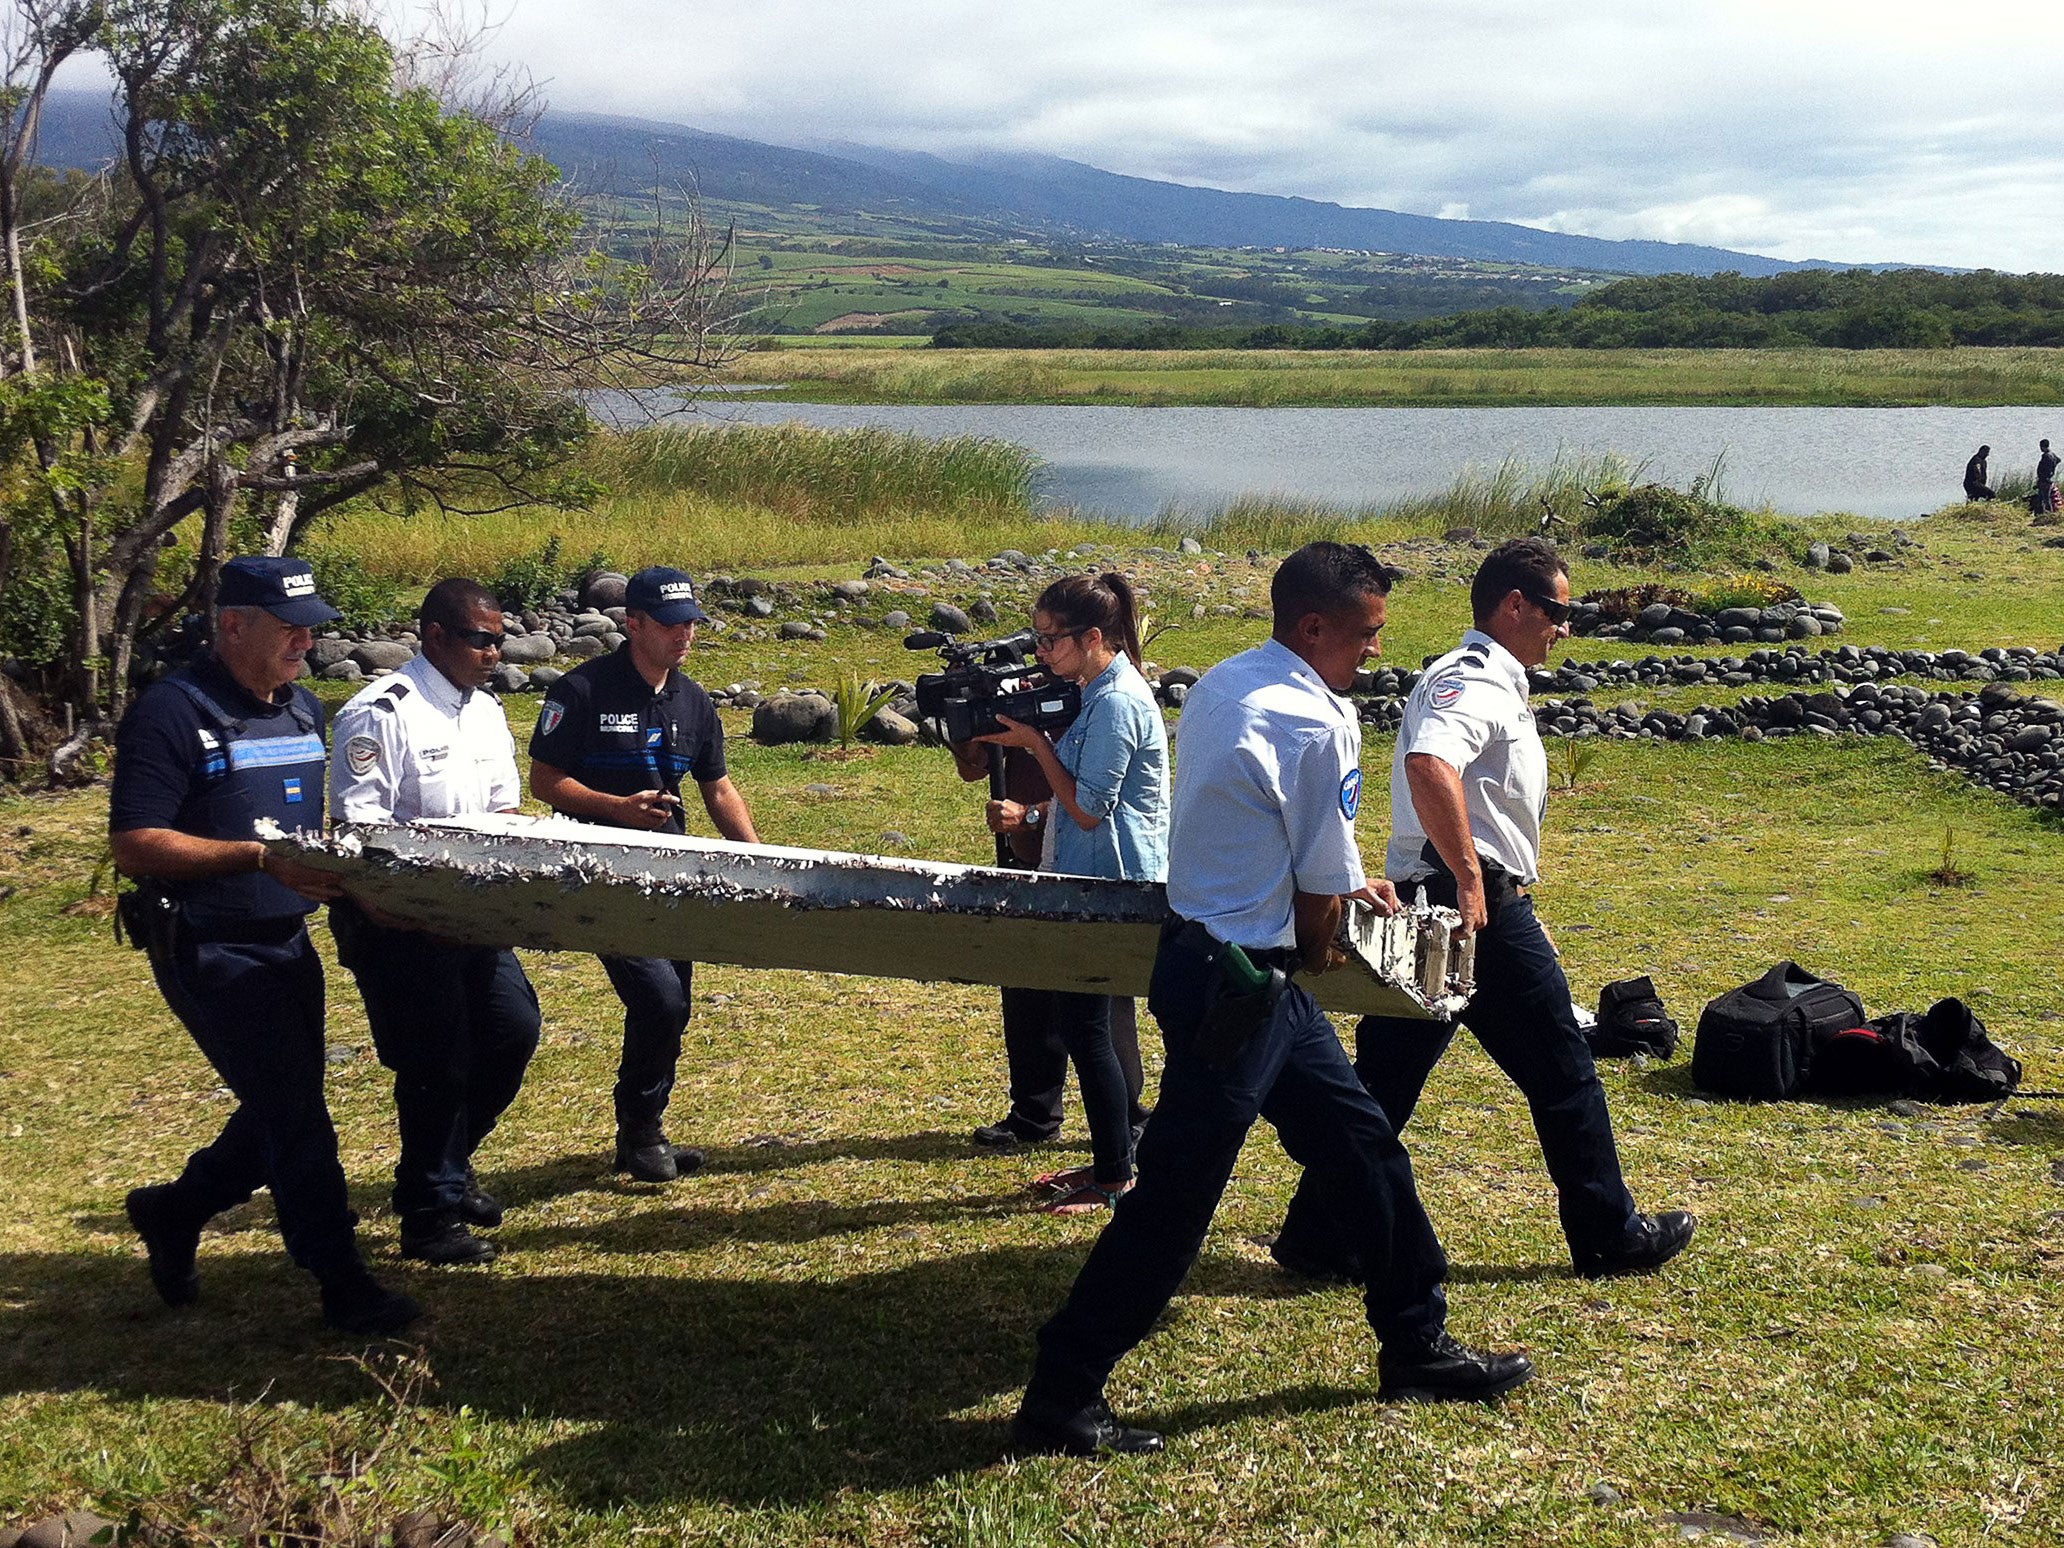 Police carry the possible MH370 debris, which has been sent to France for investigation